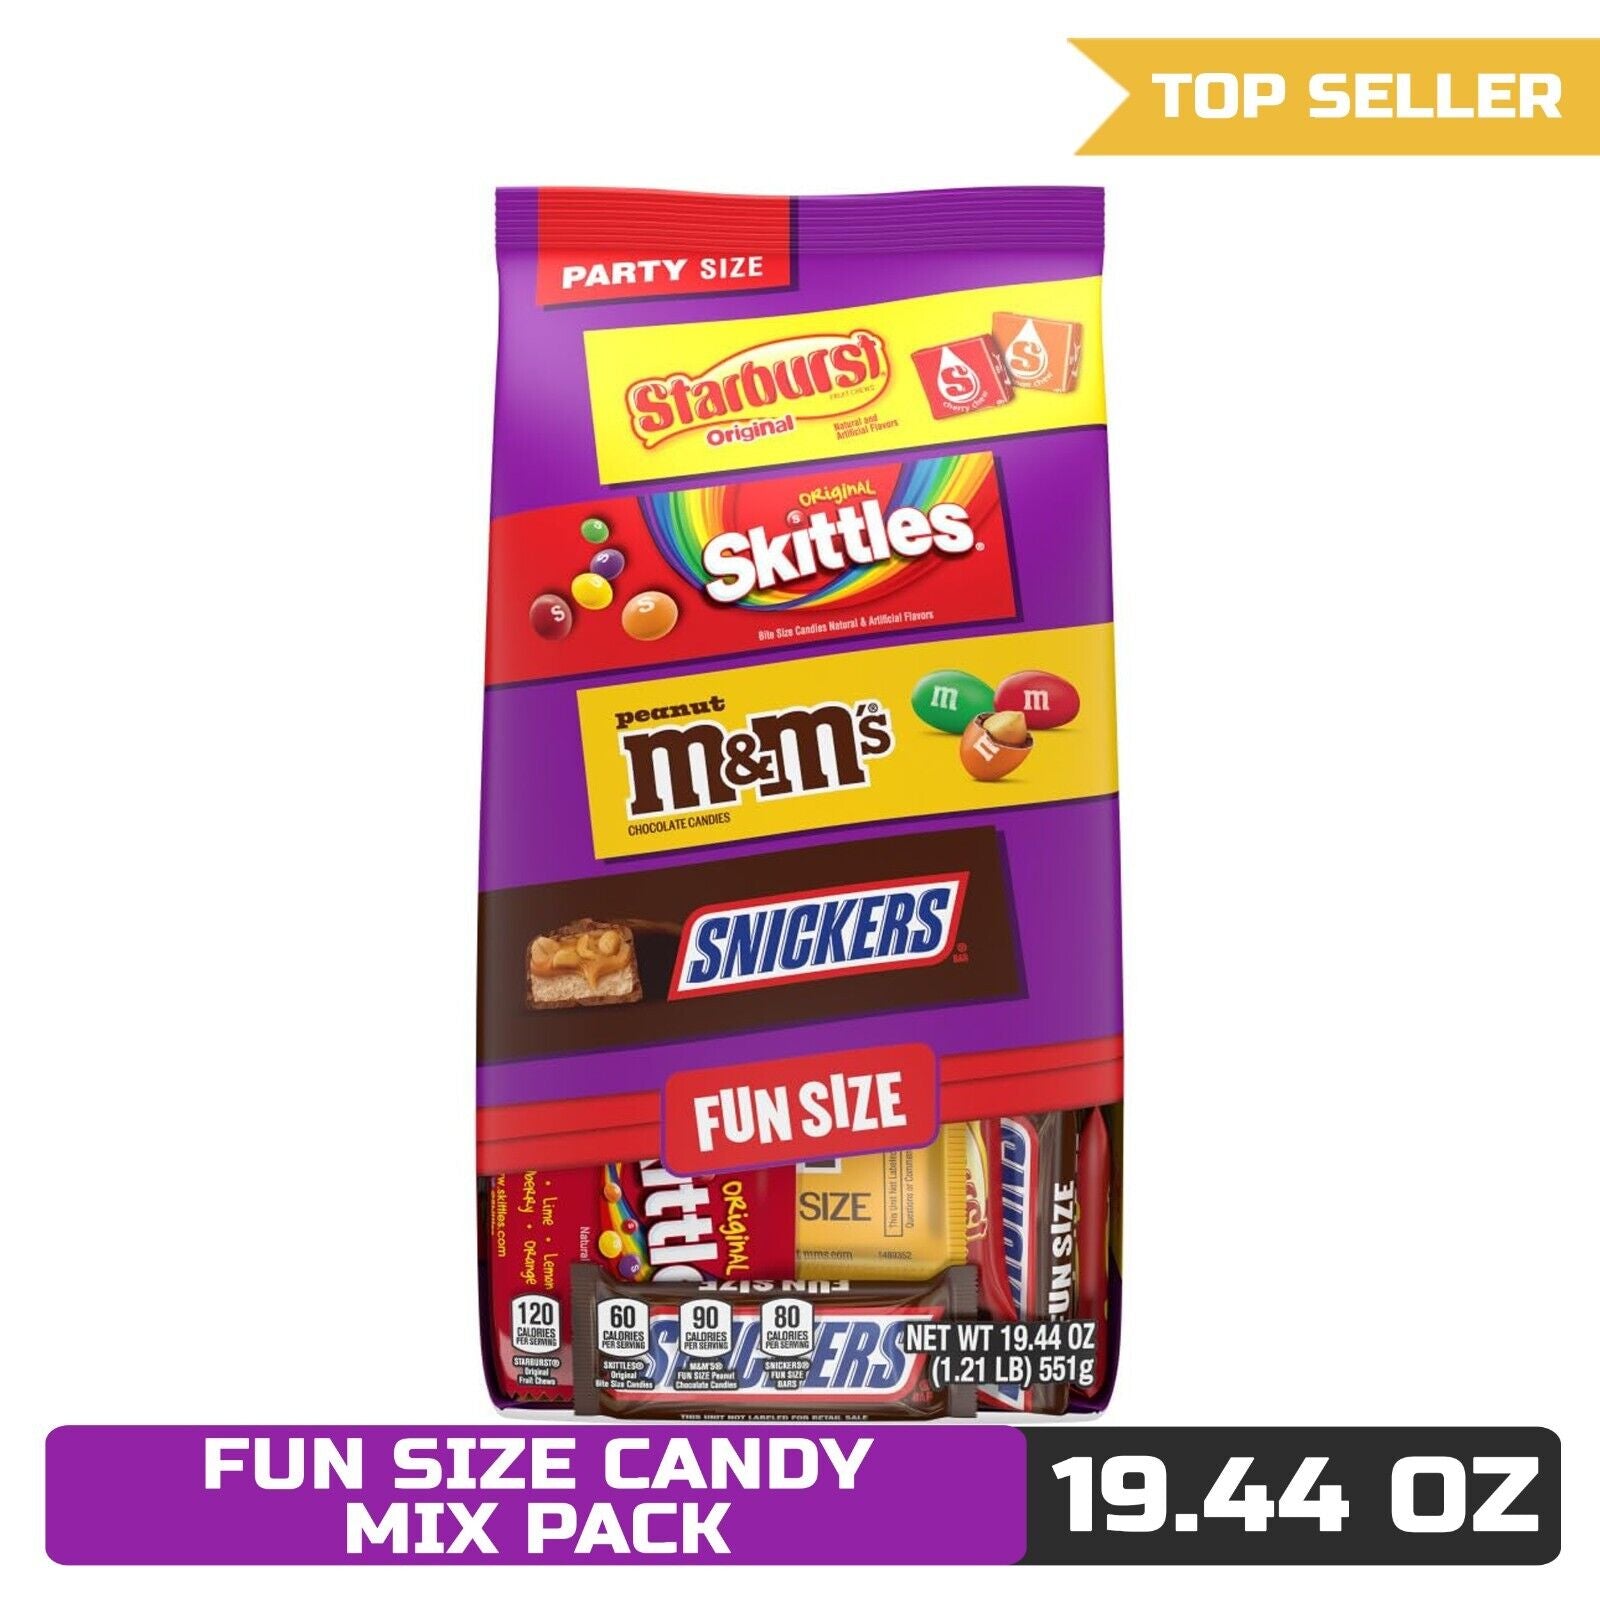 M&M'S, SNICKERS, STARBURST & SKITTLES Fun Size Candy Variety Pack, 19.44 Oz